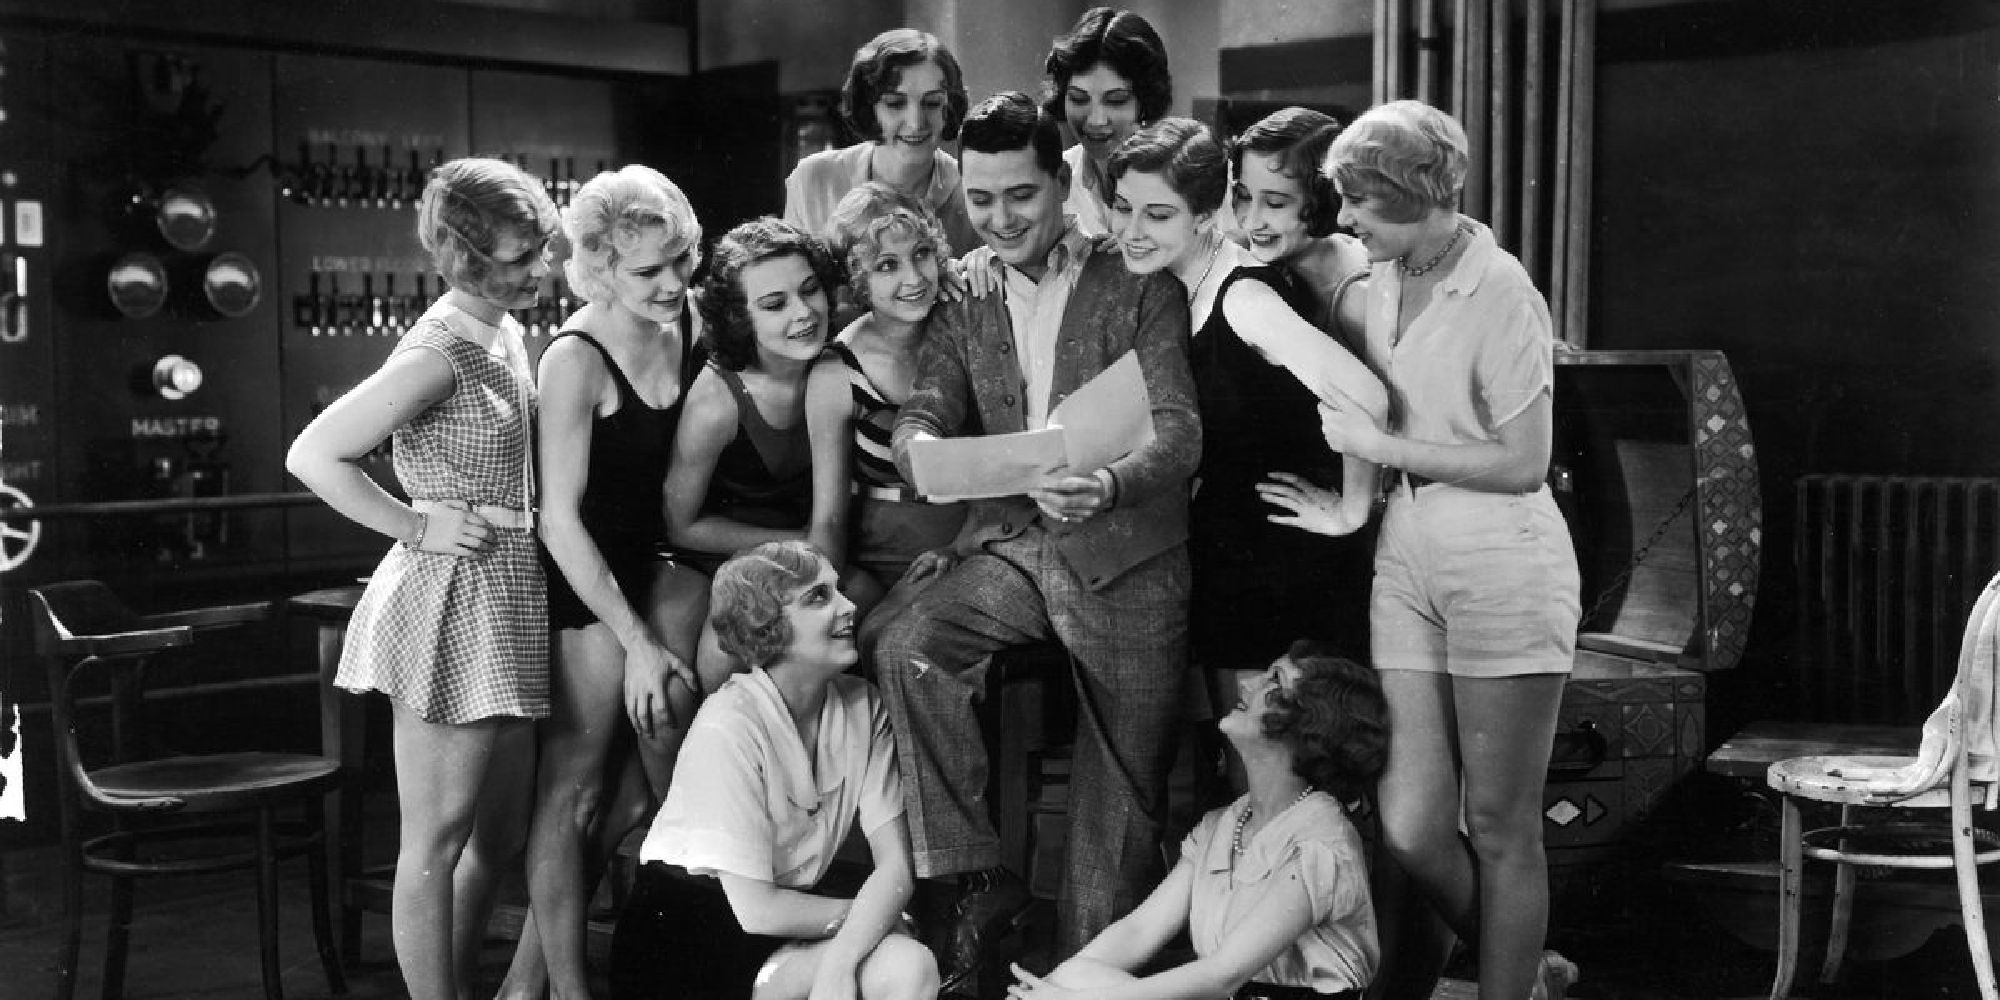 The Broadway Melody